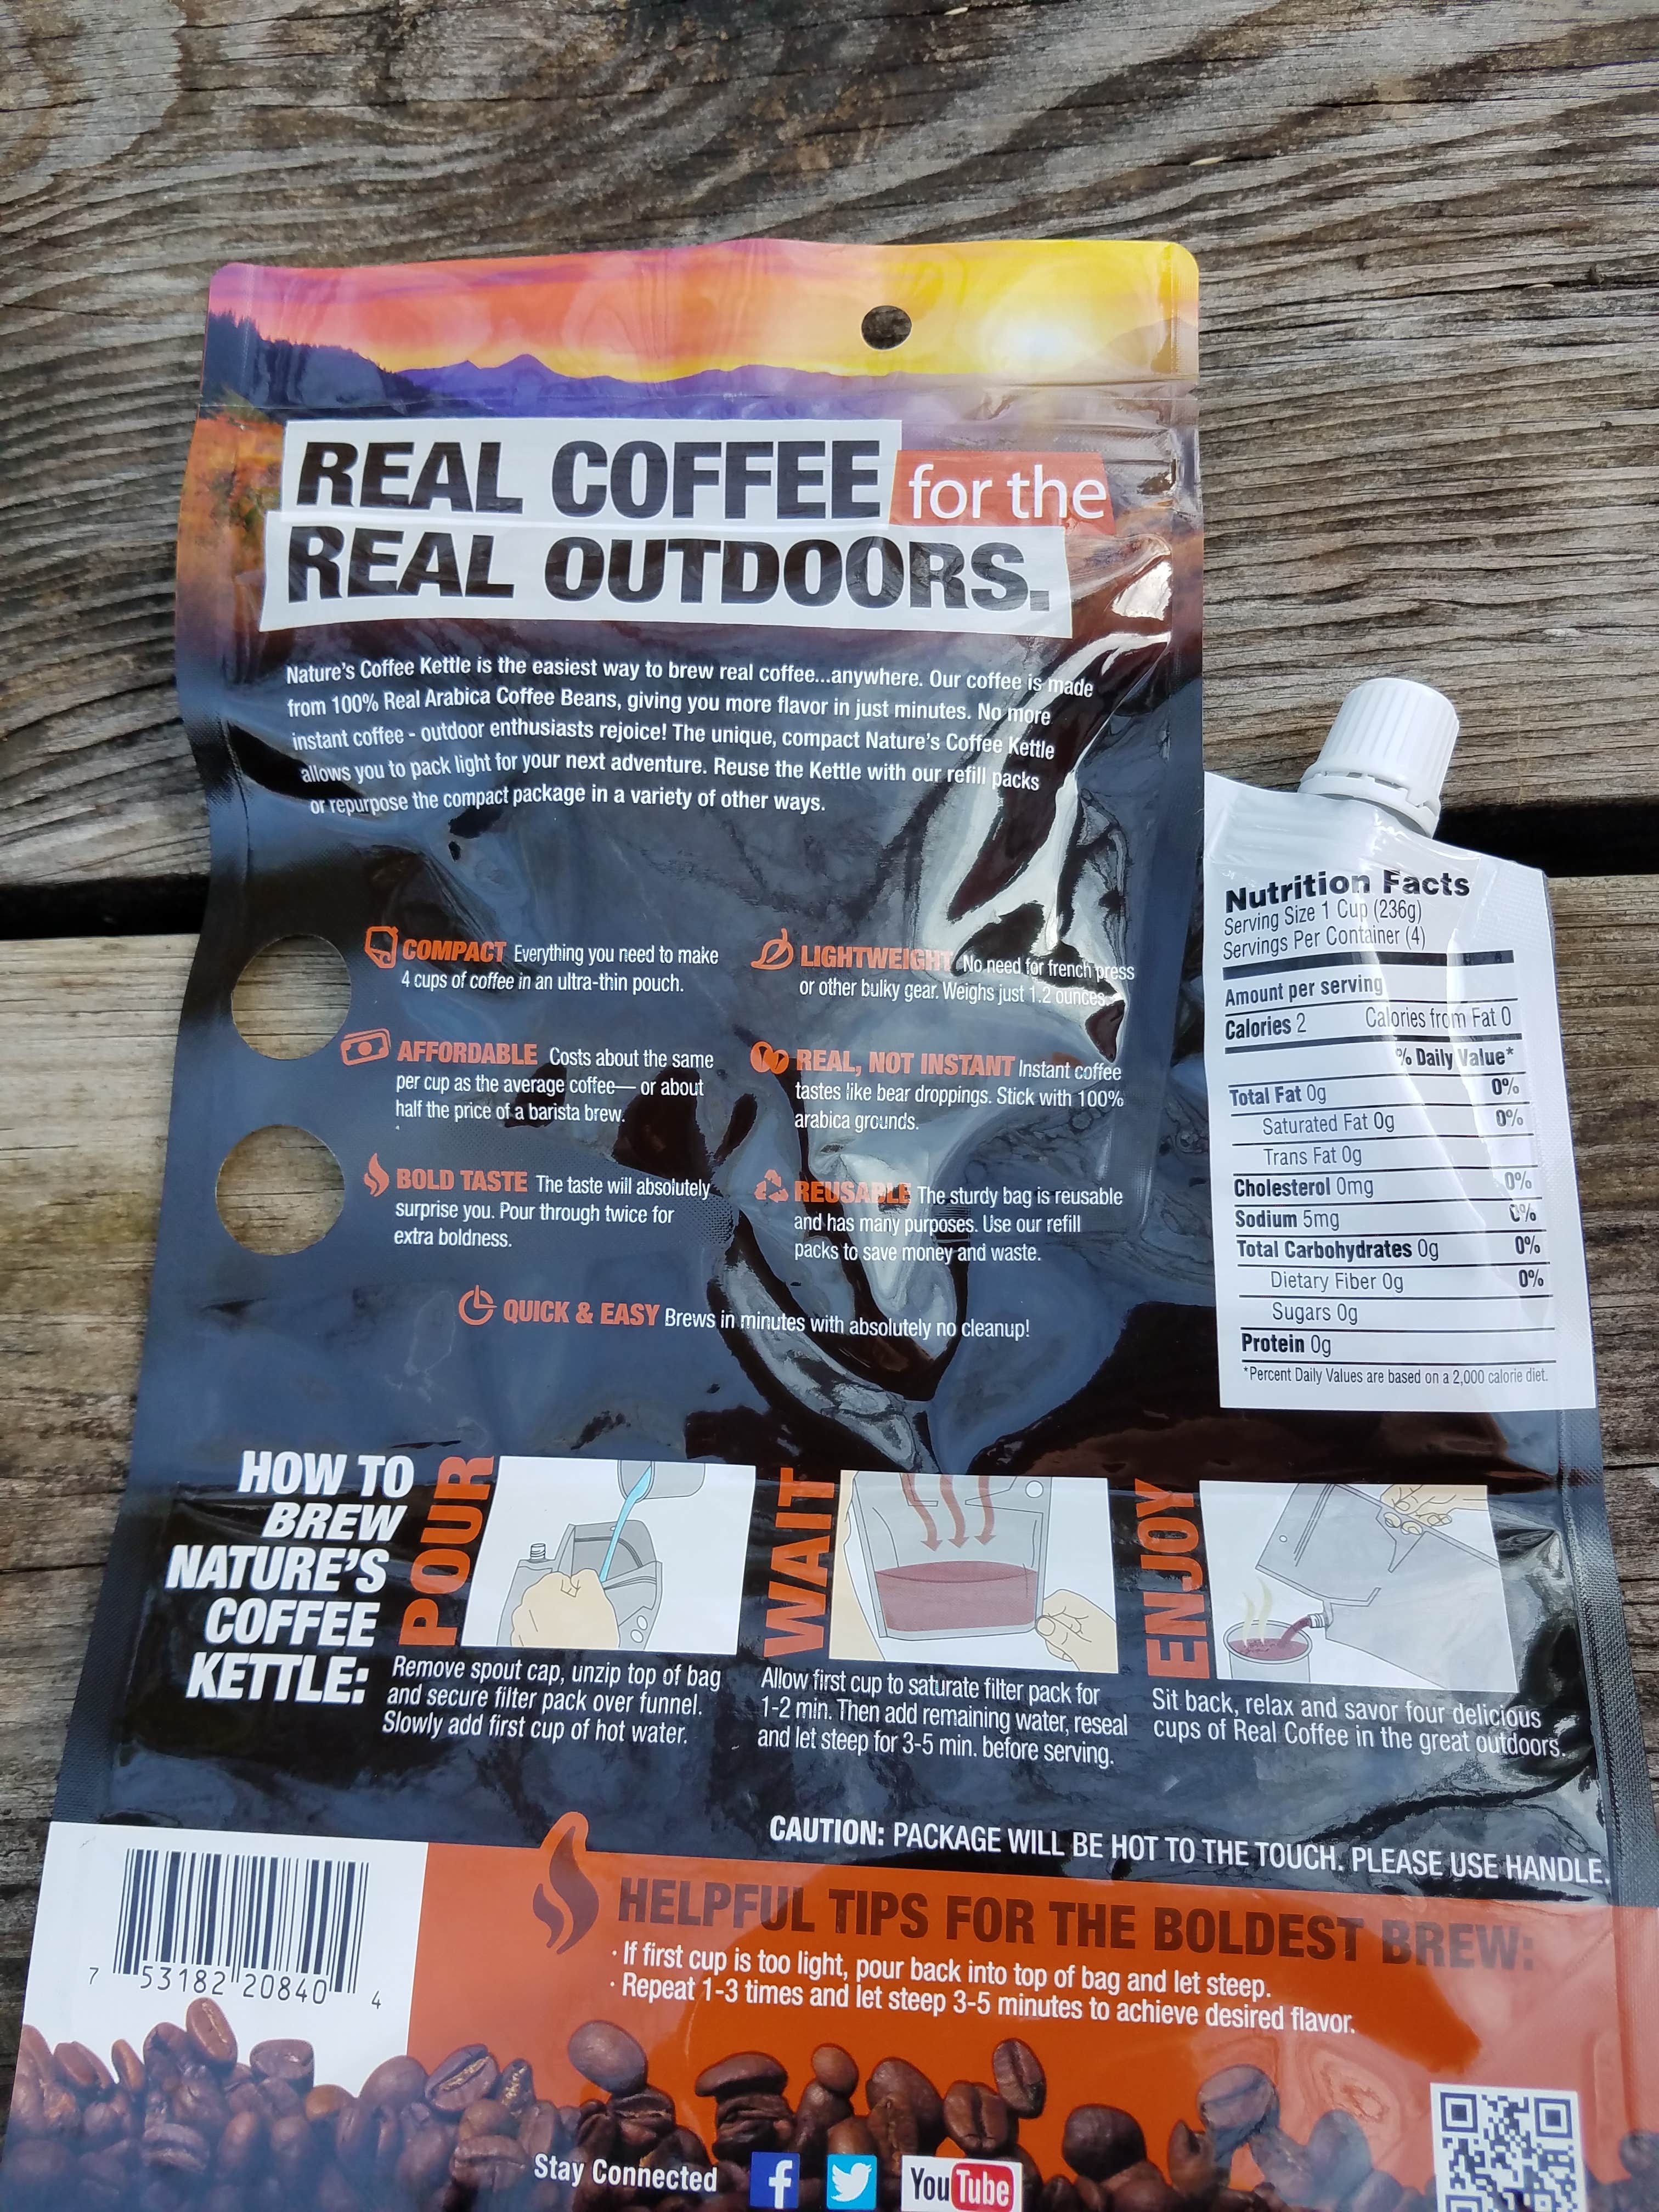 Seriously delicious coffee you can make in the woods